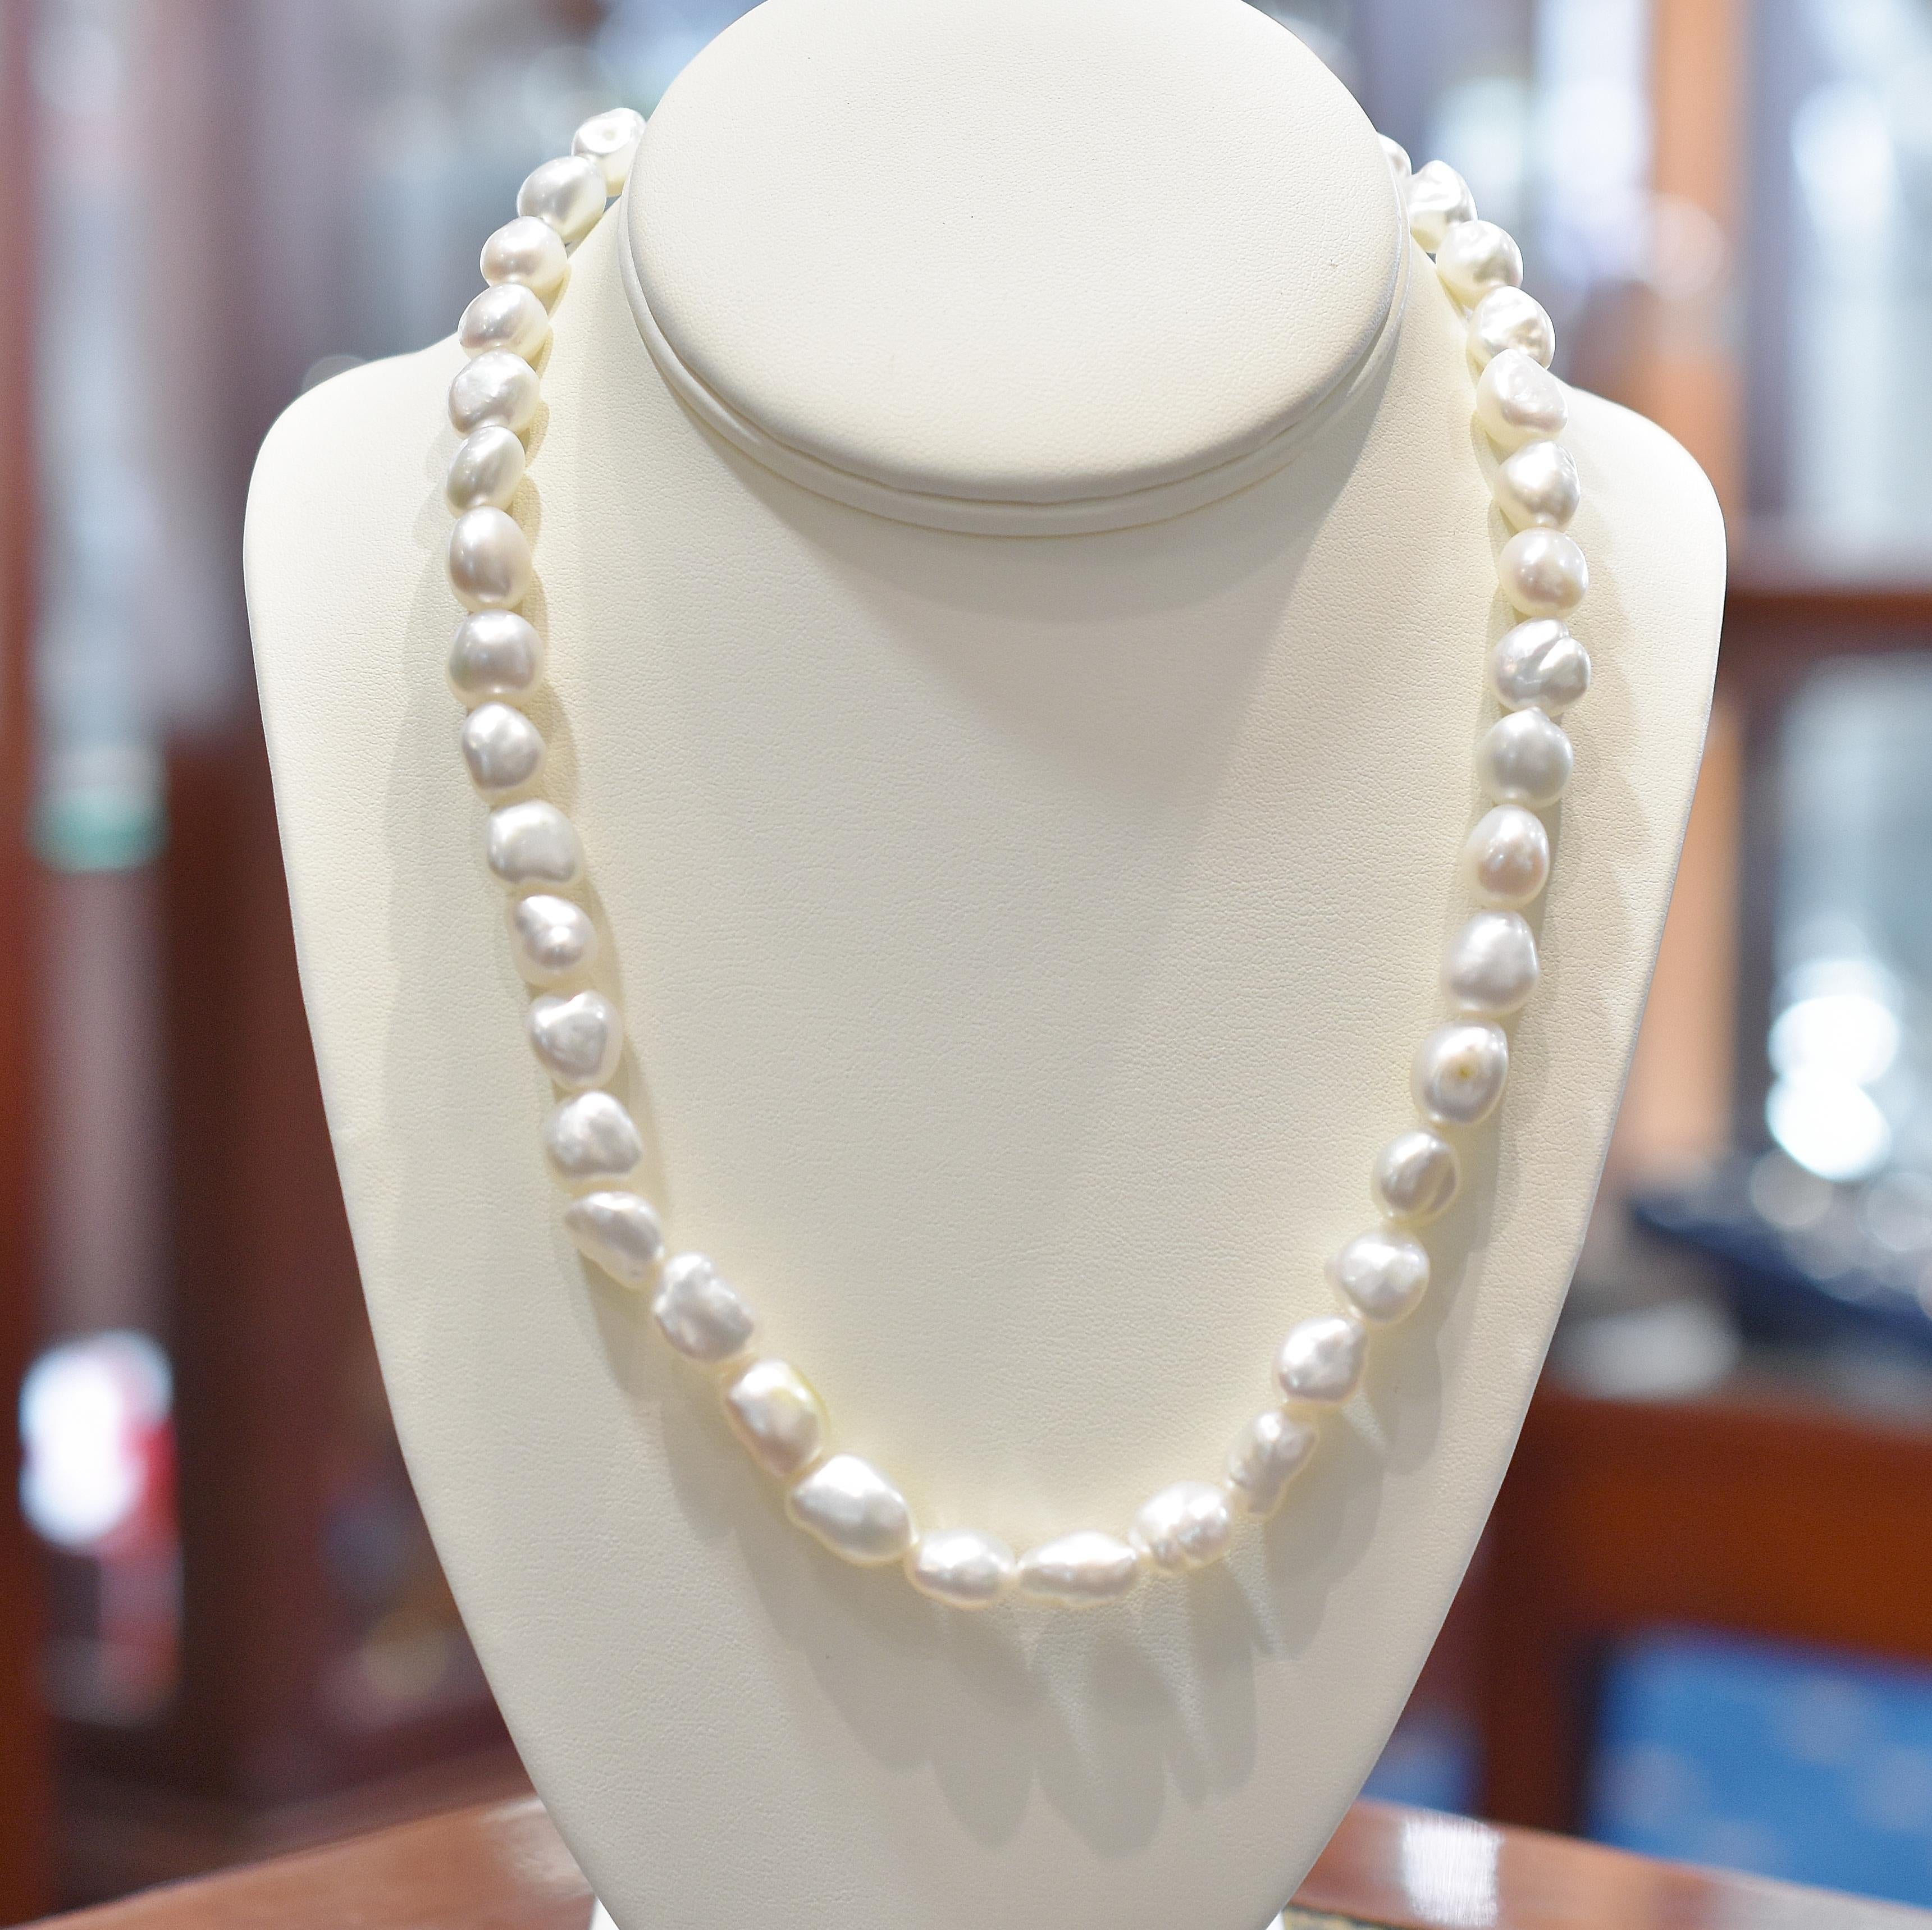 Keshi pearl creamy white necklace on a 10mm sterling silver fluted ball box clasp. There are 42 pearls from 9.0mm to 11.0mm 
The strand is 45cm in length